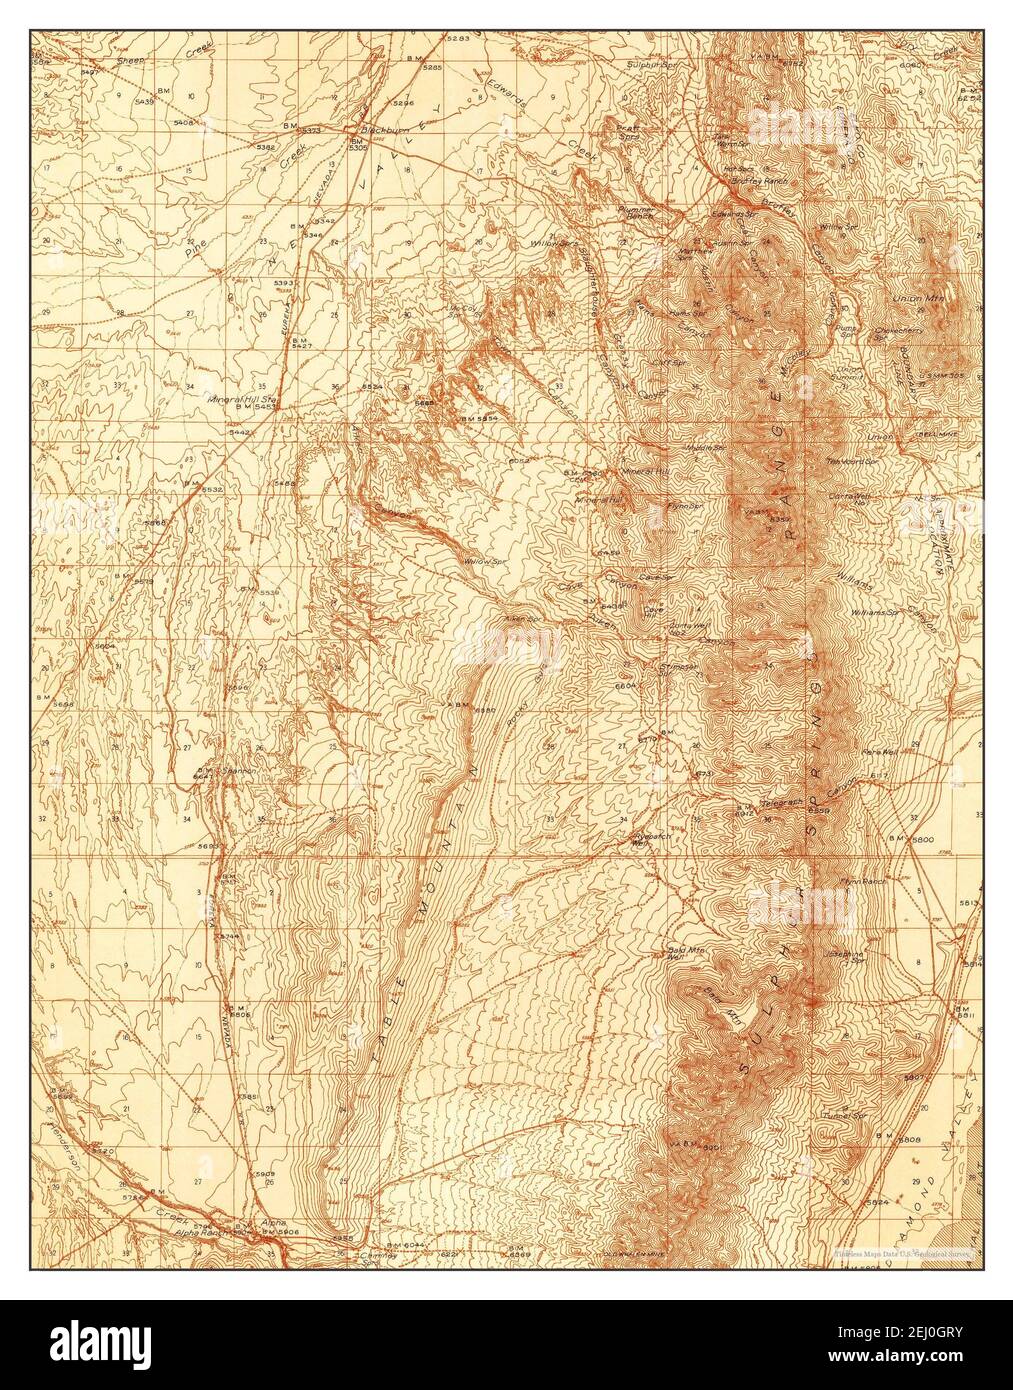 Mineral Hill, Nevada, map 1937, 1:48000, United States of America by Timeless Maps, data U.S. Geological Survey Foto Stock